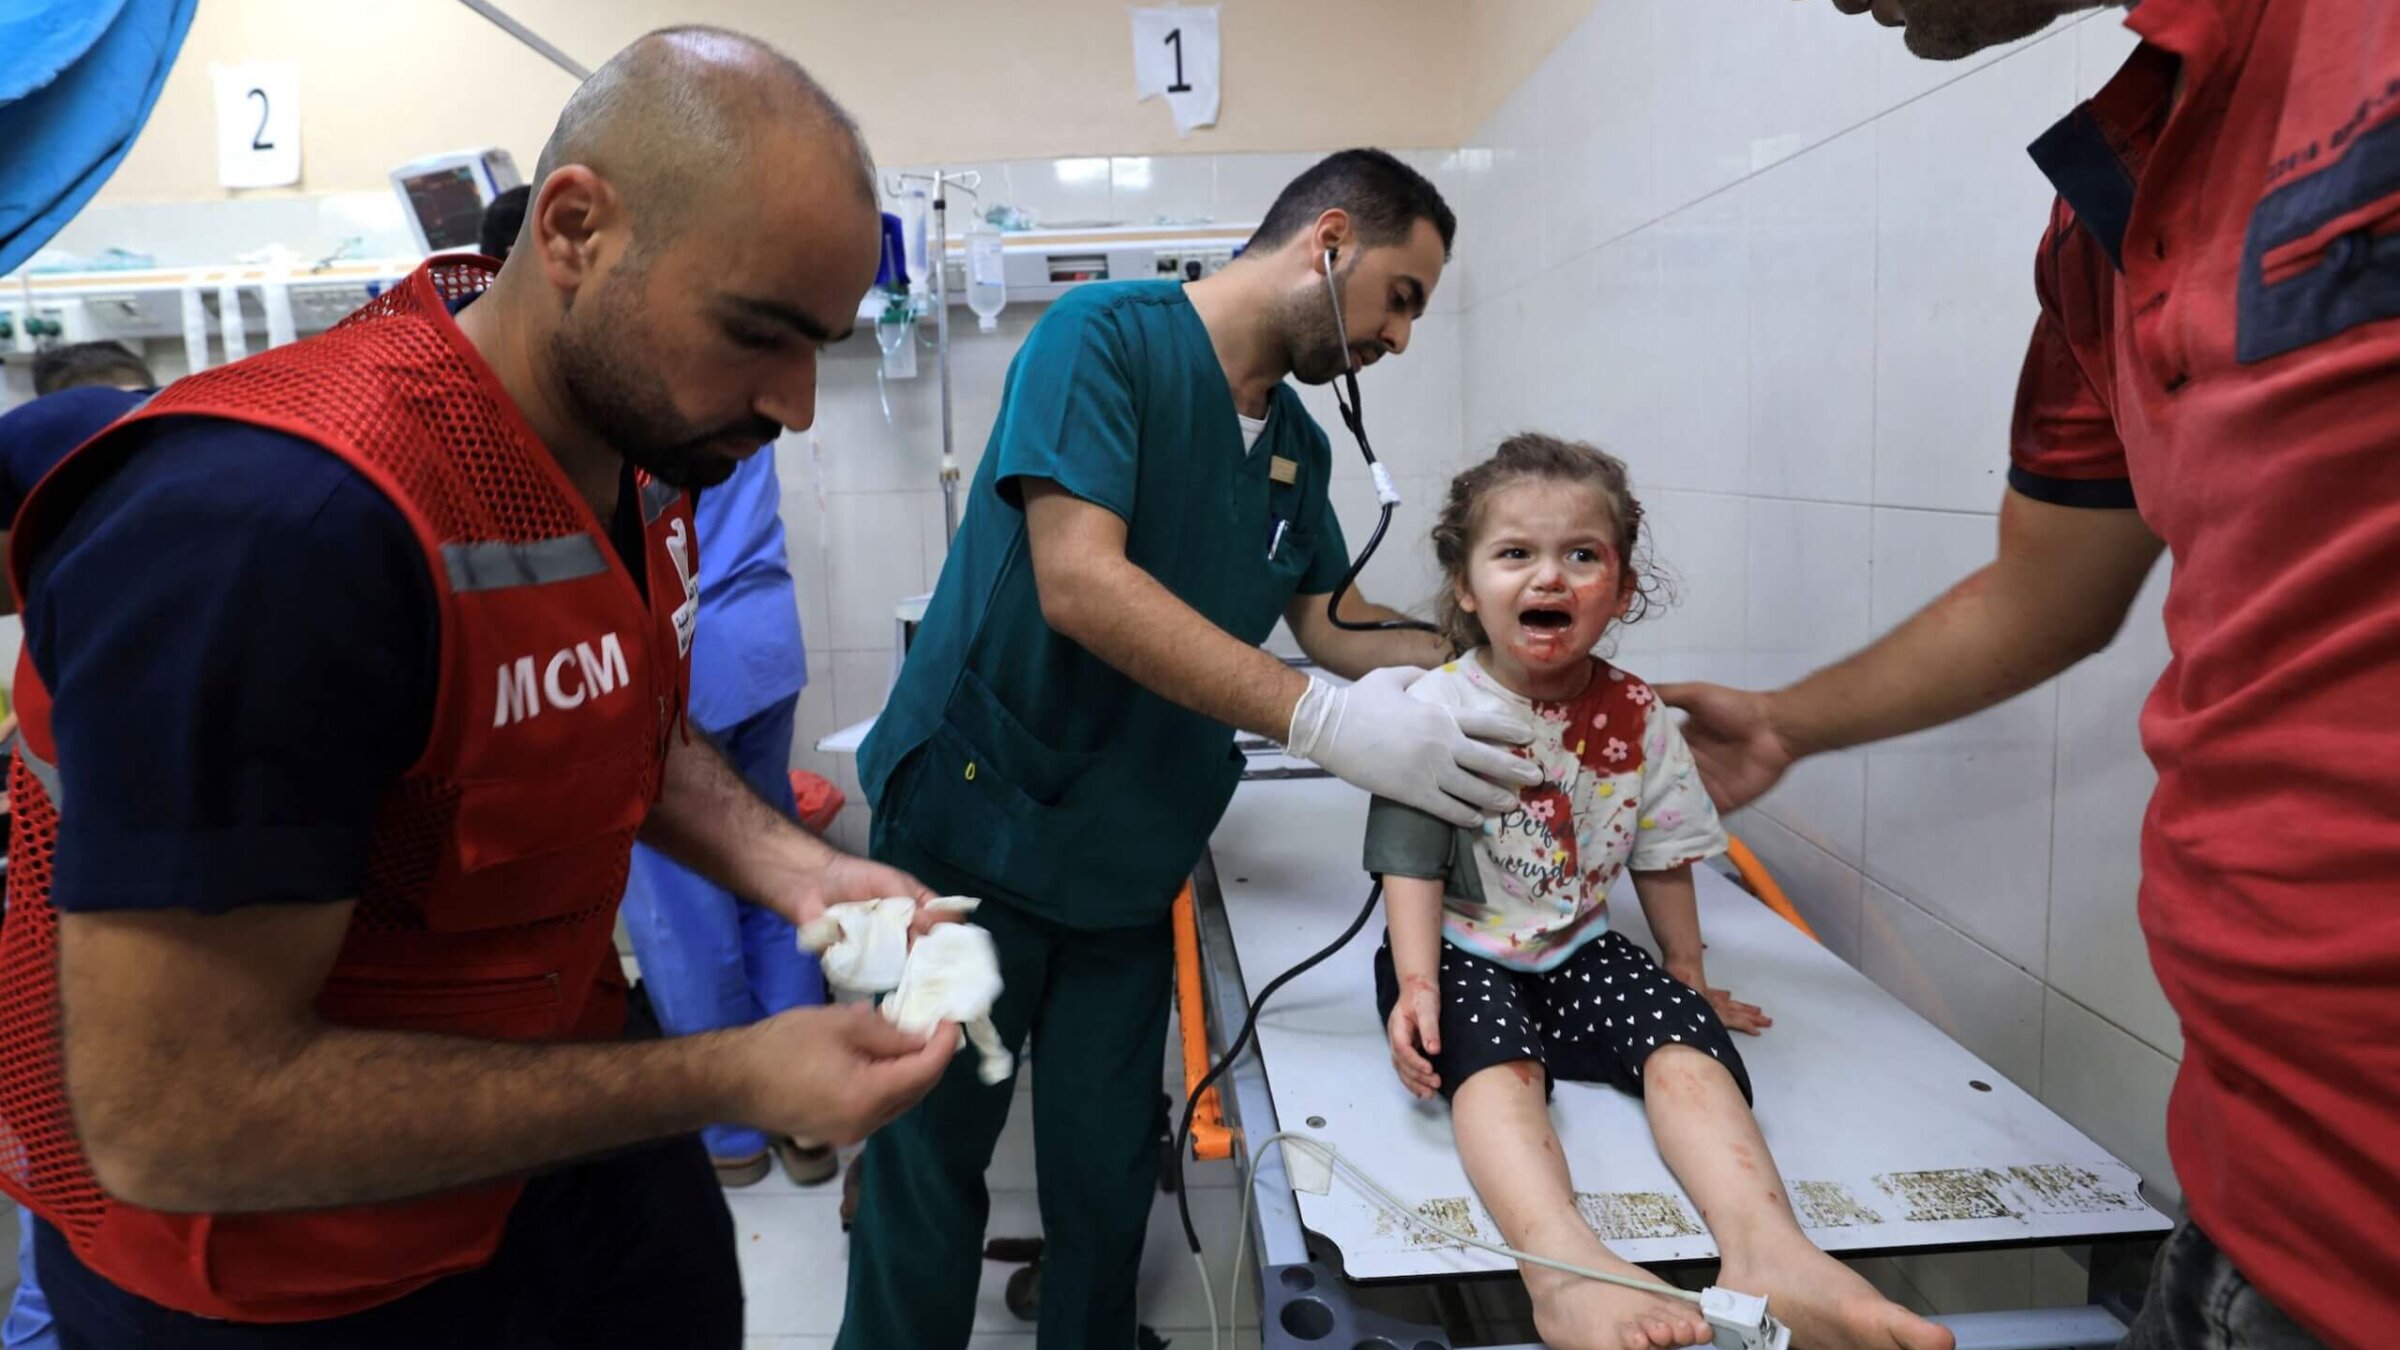 Mahmud al-Astal, a Palestinian nurse, attends to a little girl with a head wound at Gaza's Nasser hospital after Israeli airstrikes on Khan Yunis in the southern Gaza Strip on Friday.